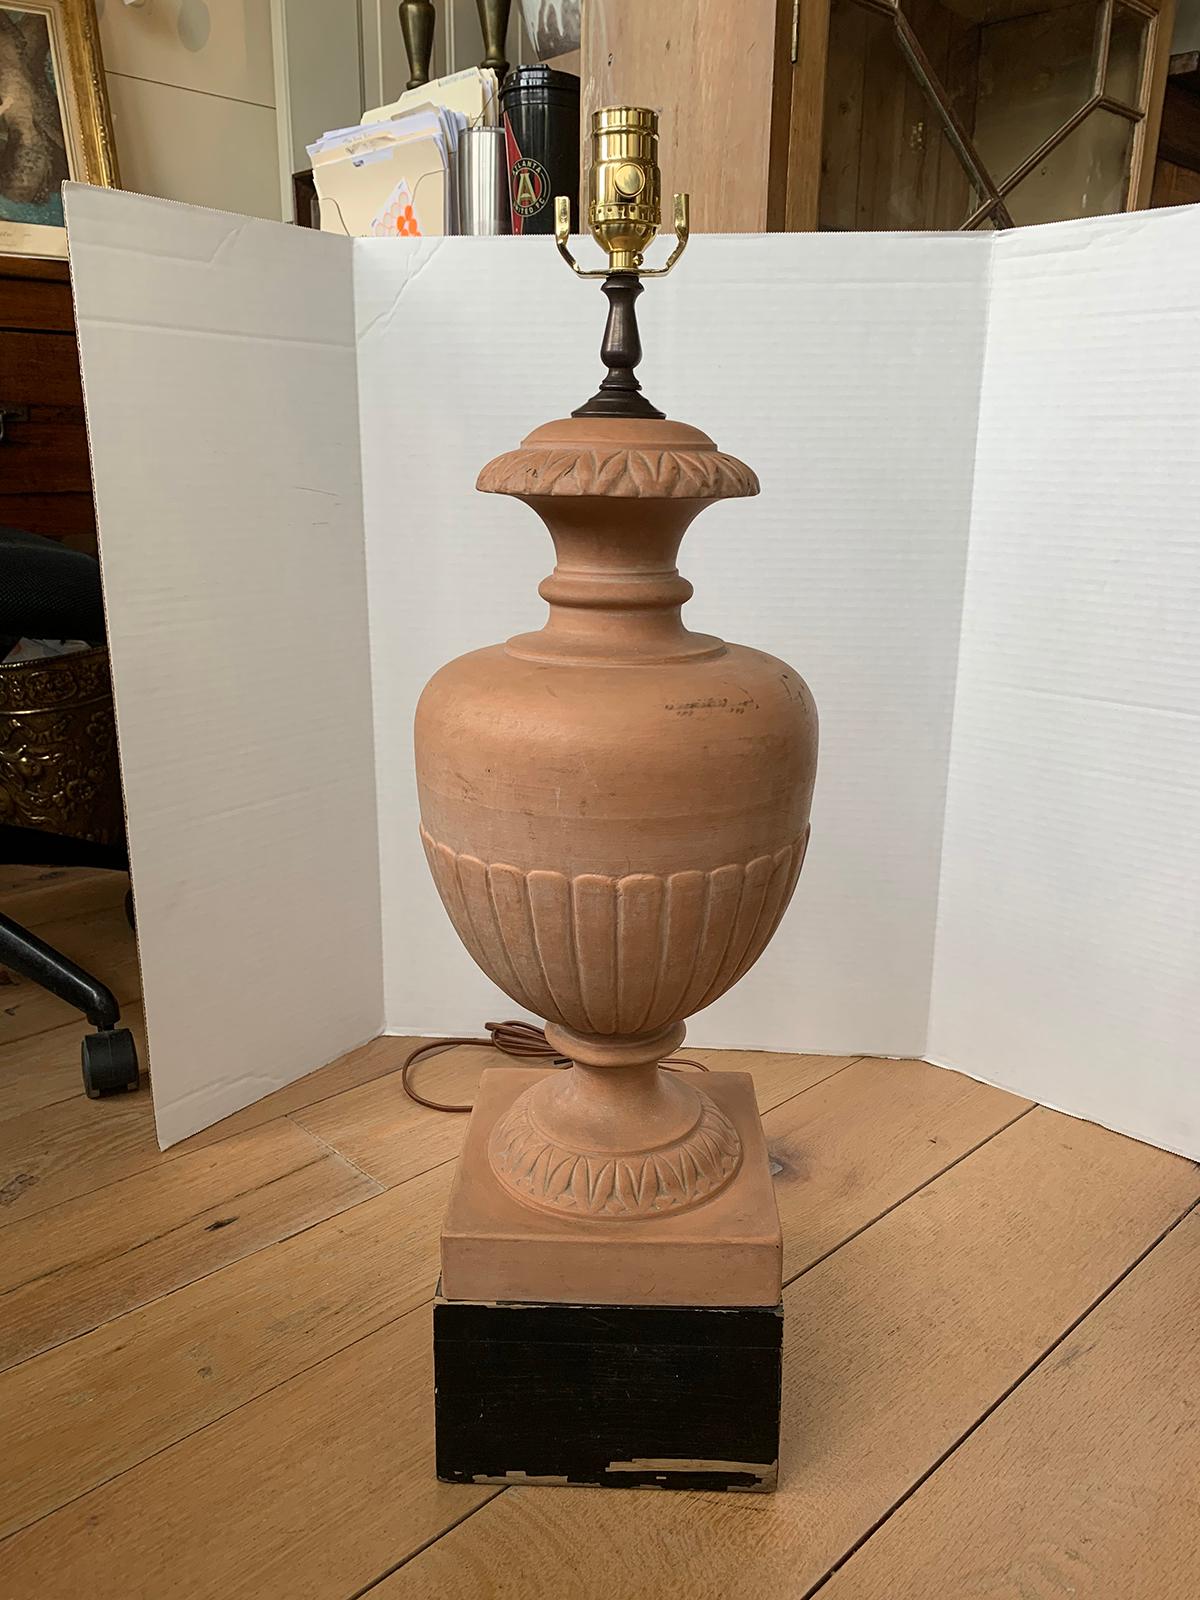 Mid-20th century Italian terracotta urn as lamp with painted black wood base
new wiring.